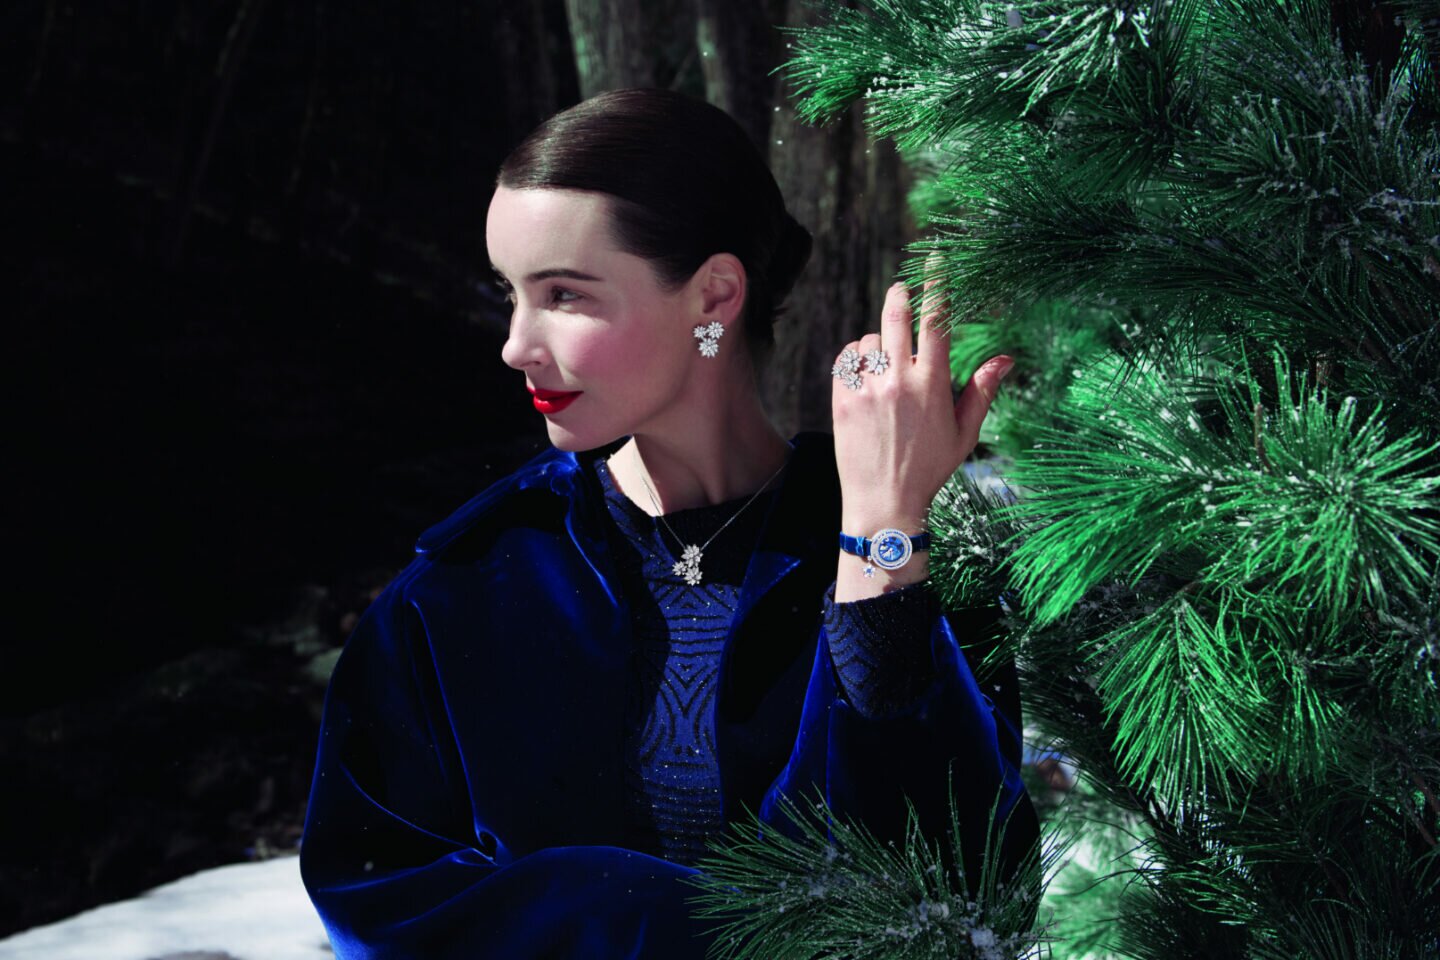 Wear These New Designs From Van Cleef & Arpels’ Diamond Breeze Collection On Your Winter Getaway